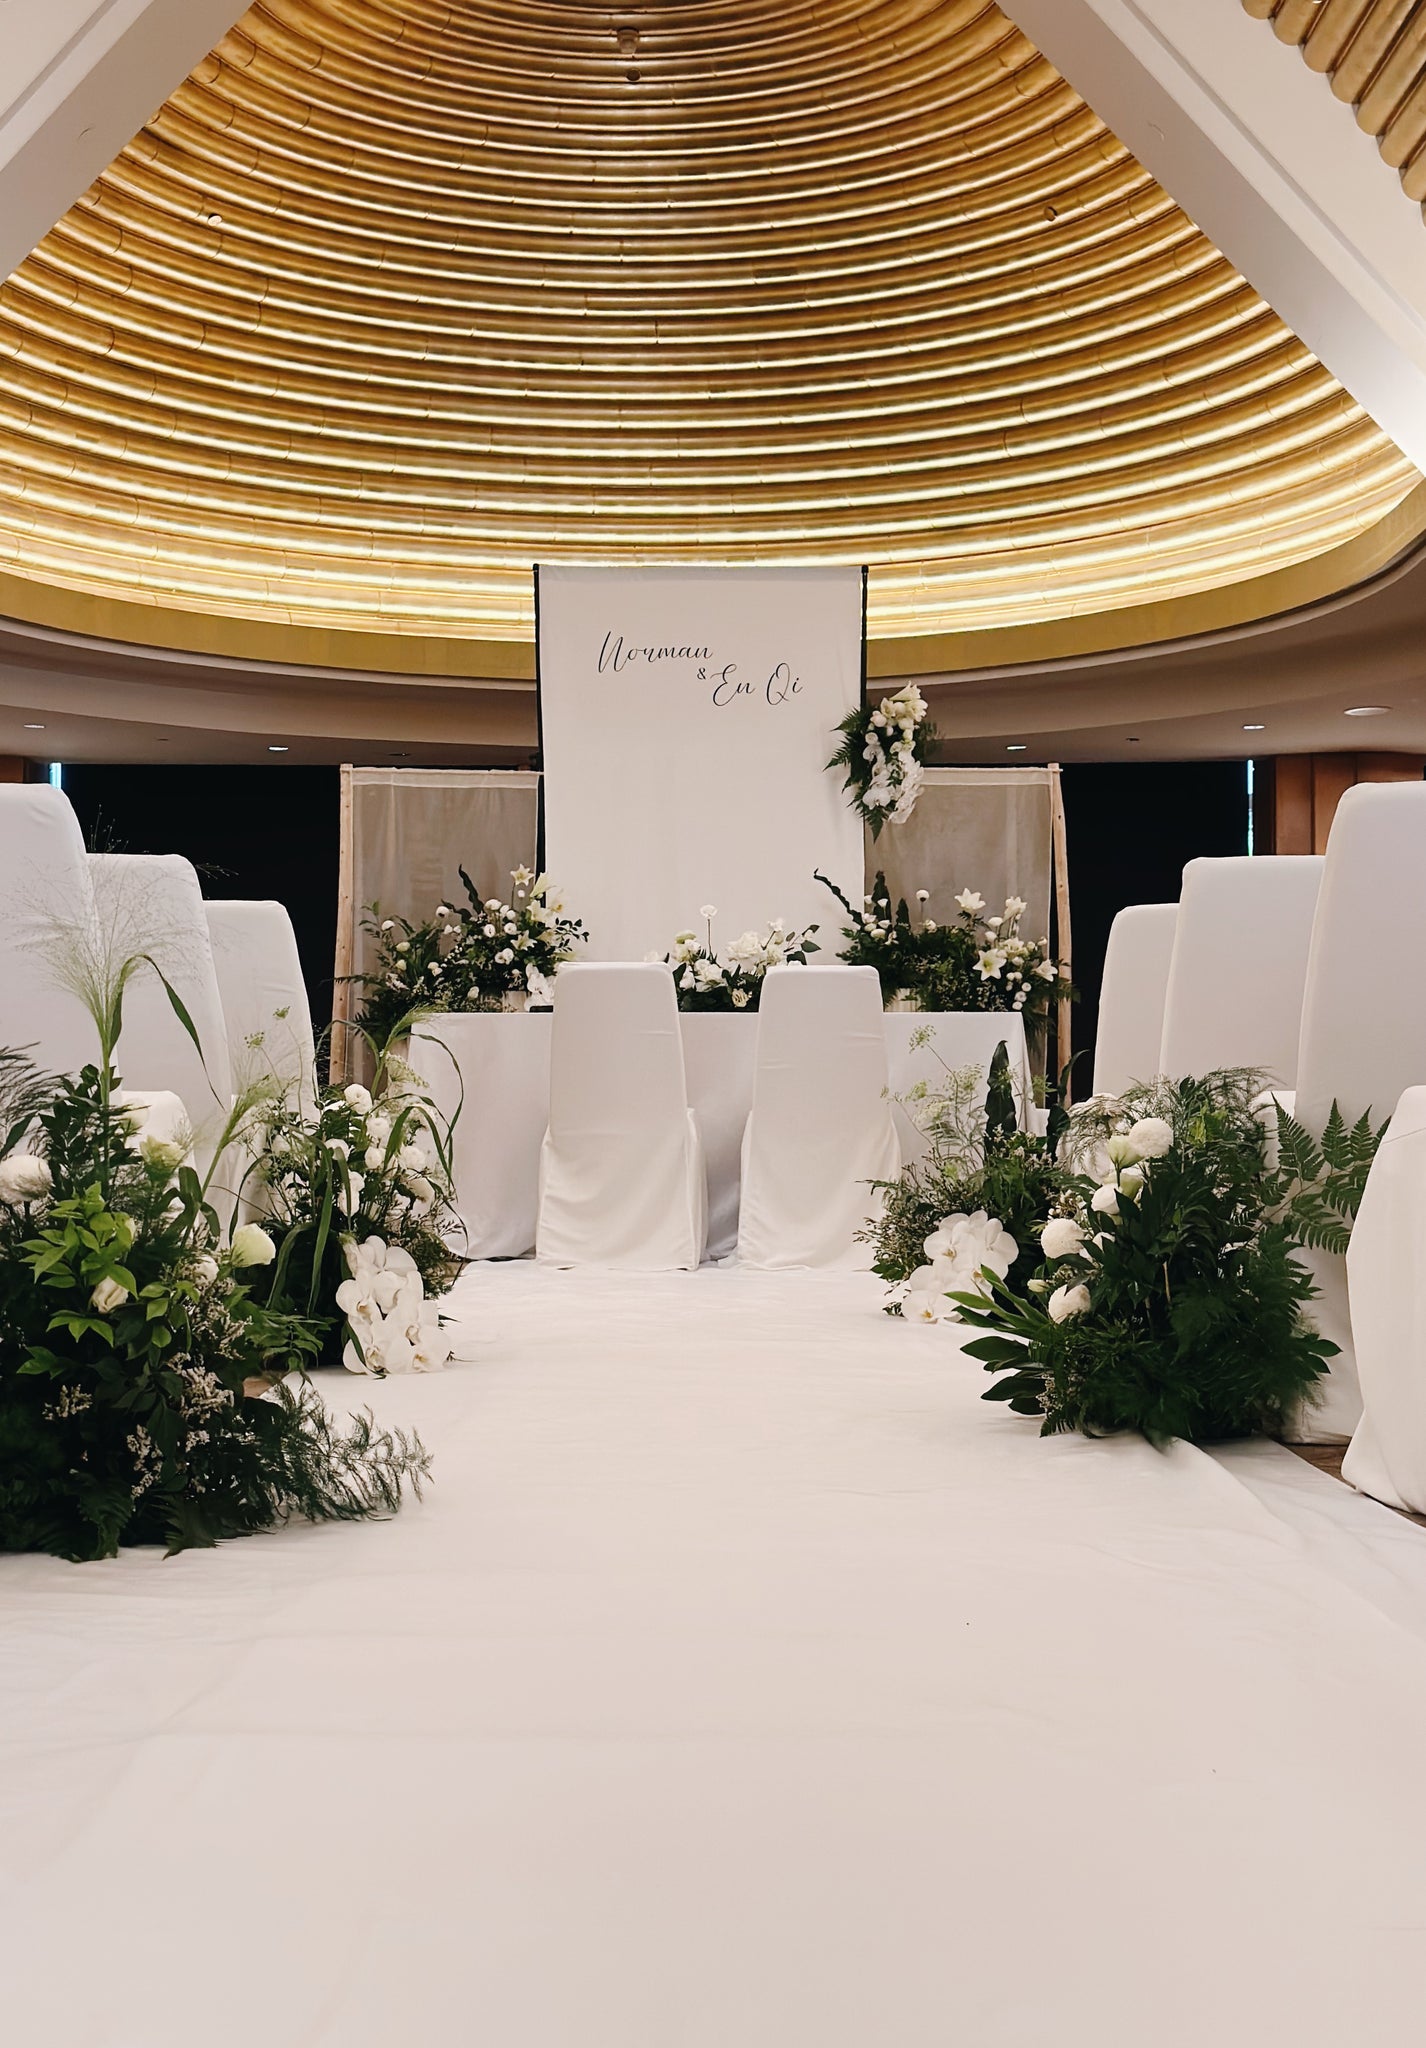 White Long Fabric for Backdrop and Aisle with Floral Botanicals for Solemnisation at Ritz Carlton 01